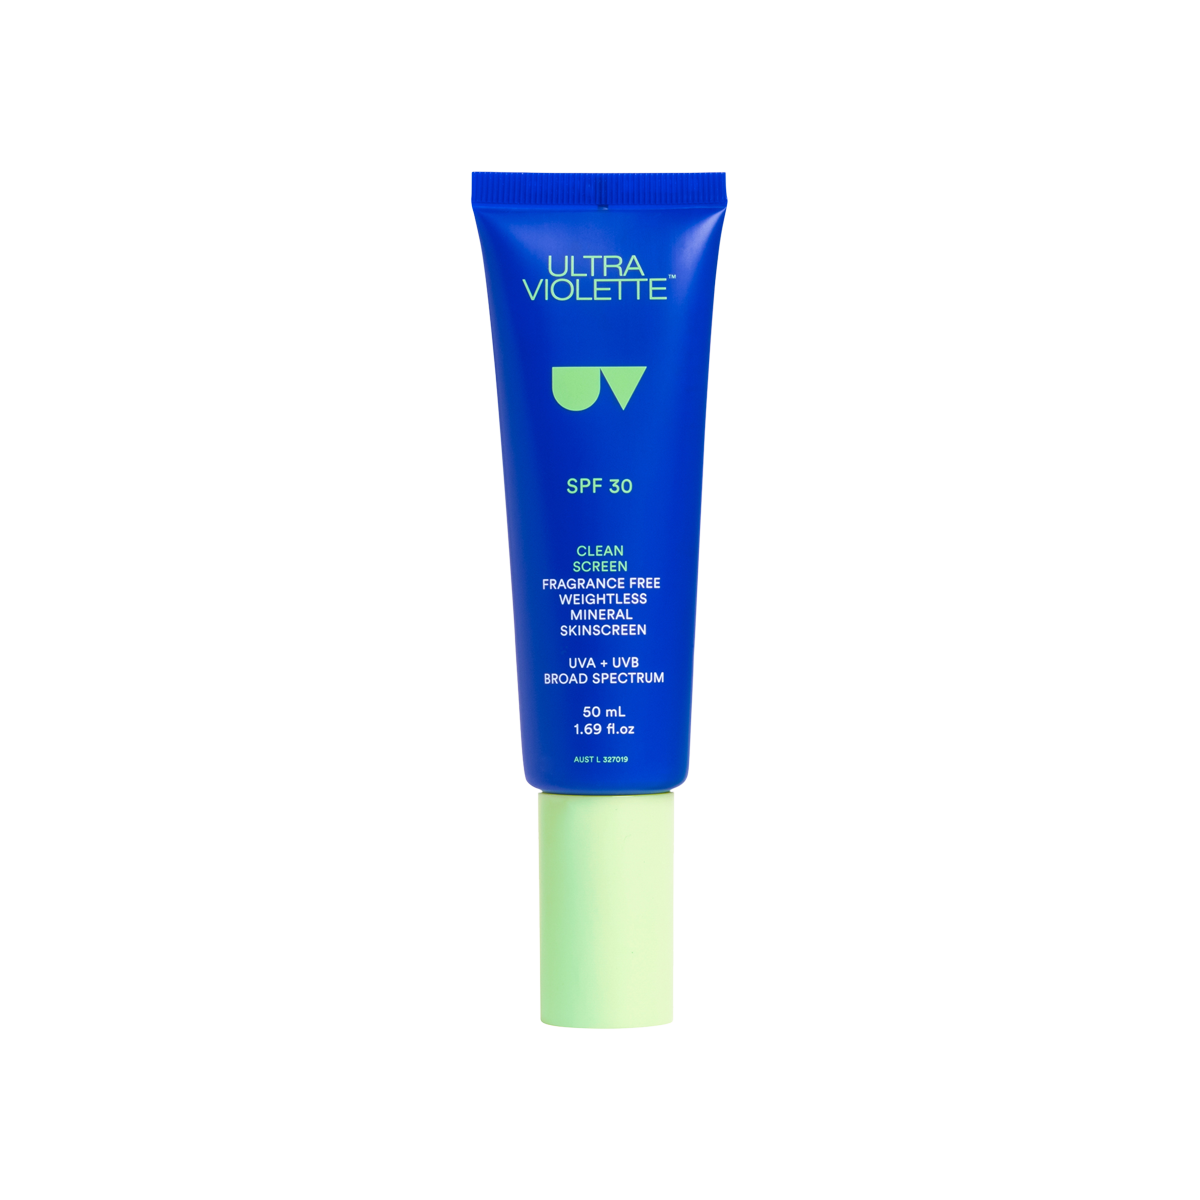 Ultra Violette - Clean Screen Fragrance Free Face SPF 30